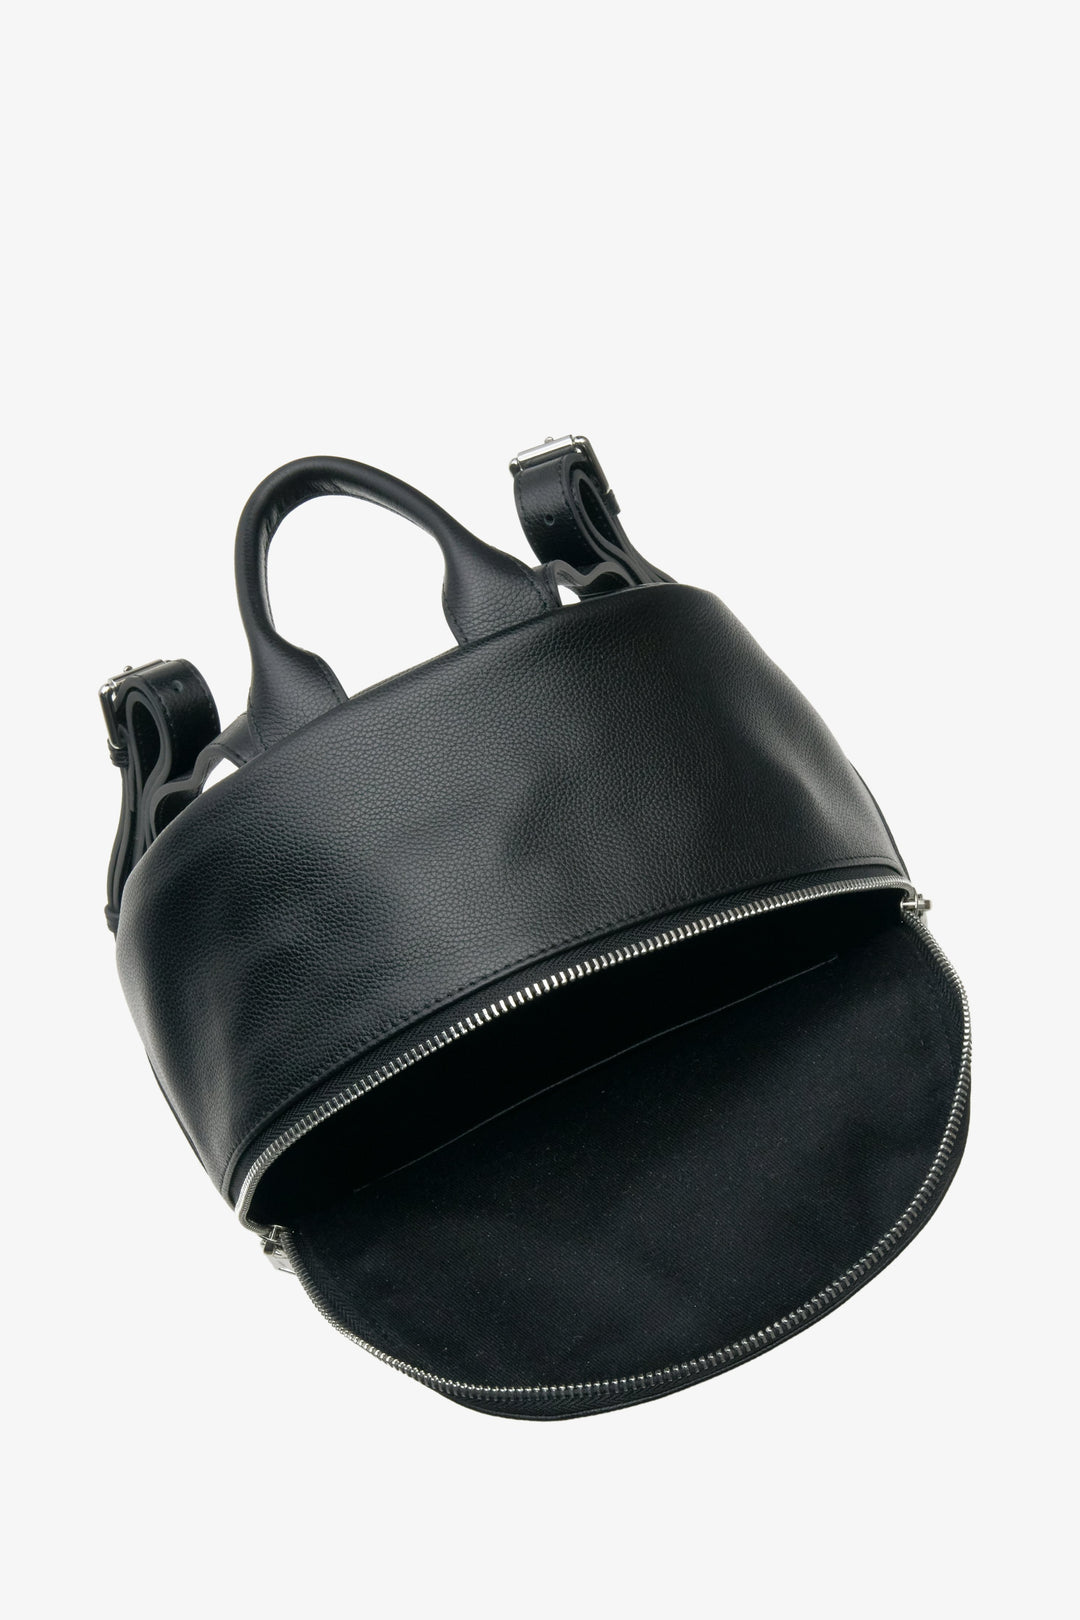 Black leather Estro backpack - close-up on the interior of the model.